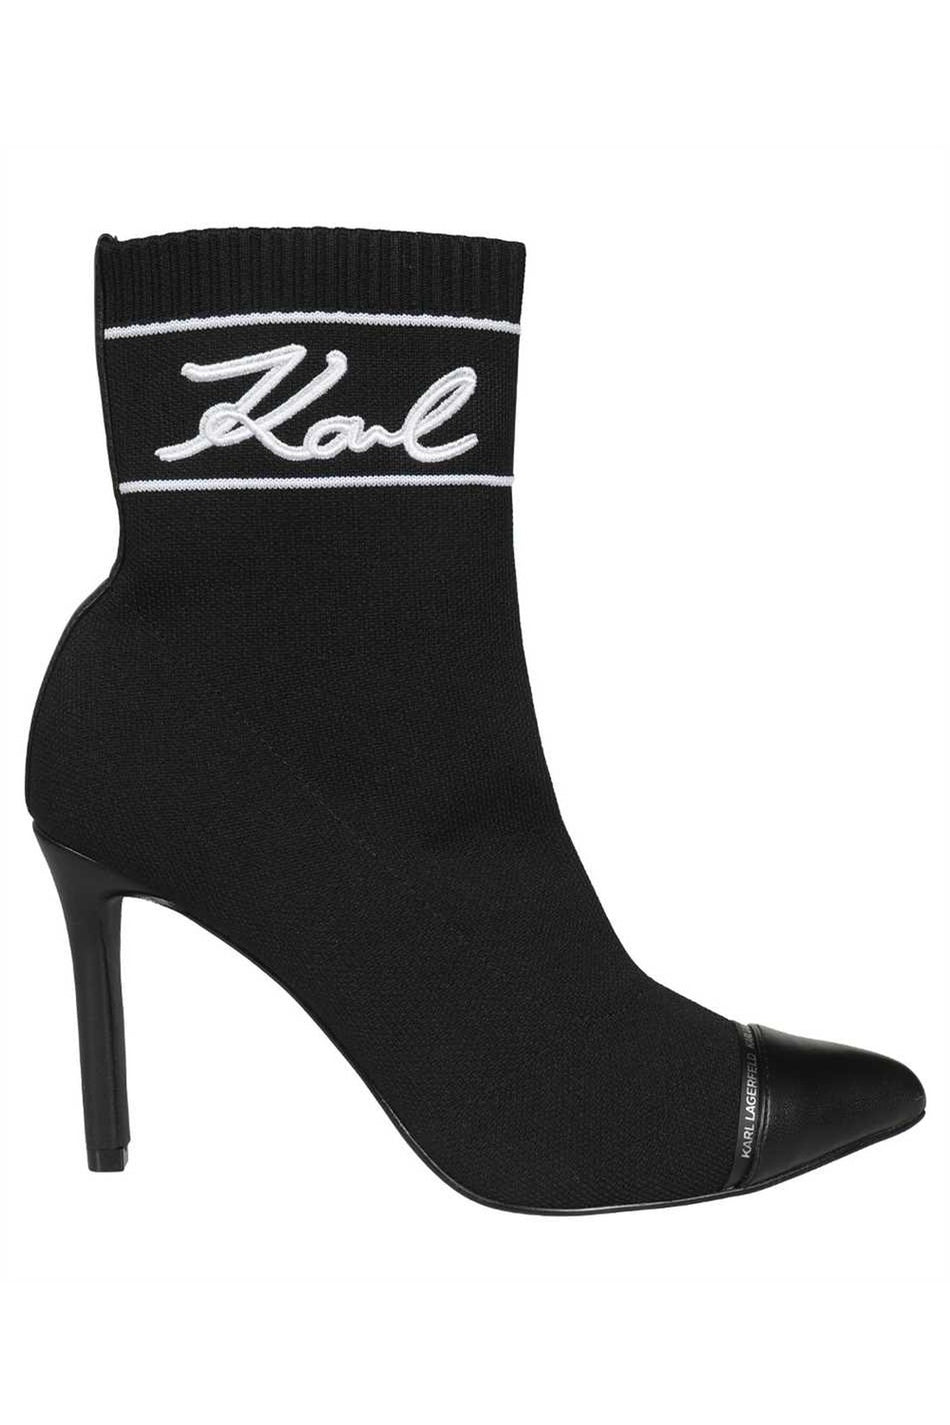 Sock ankle boots-Karl Lagerfeld-OUTLET-SALE-39-ARCHIVIST